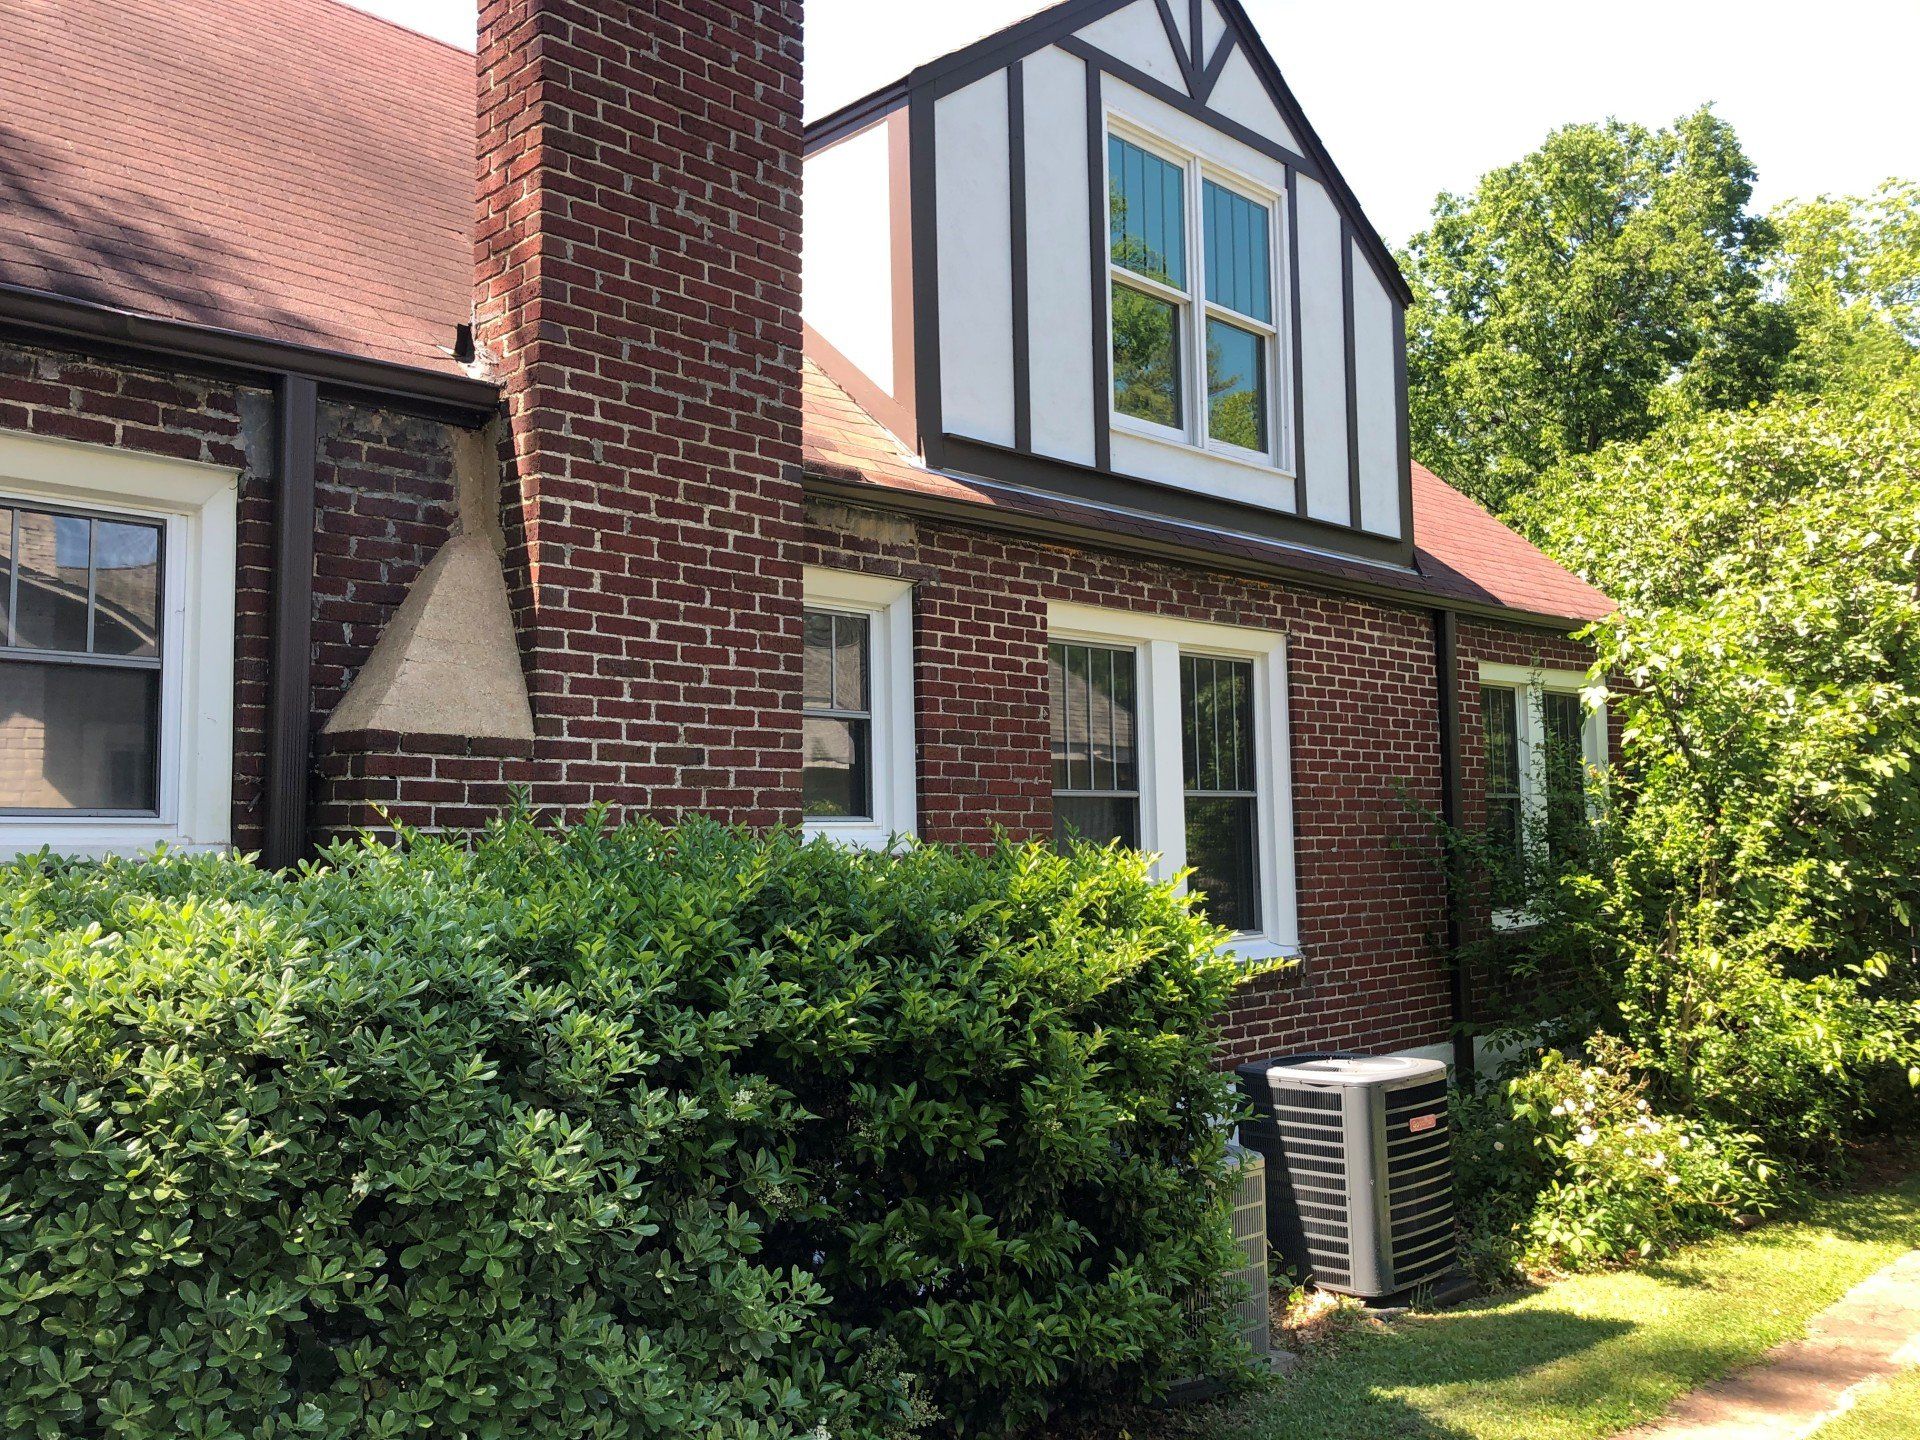 Residential window tinting - SPF Tint blocked over maximum Heat & Glare from this home, while keeping good visibility looking out at night. Birmingham, AL